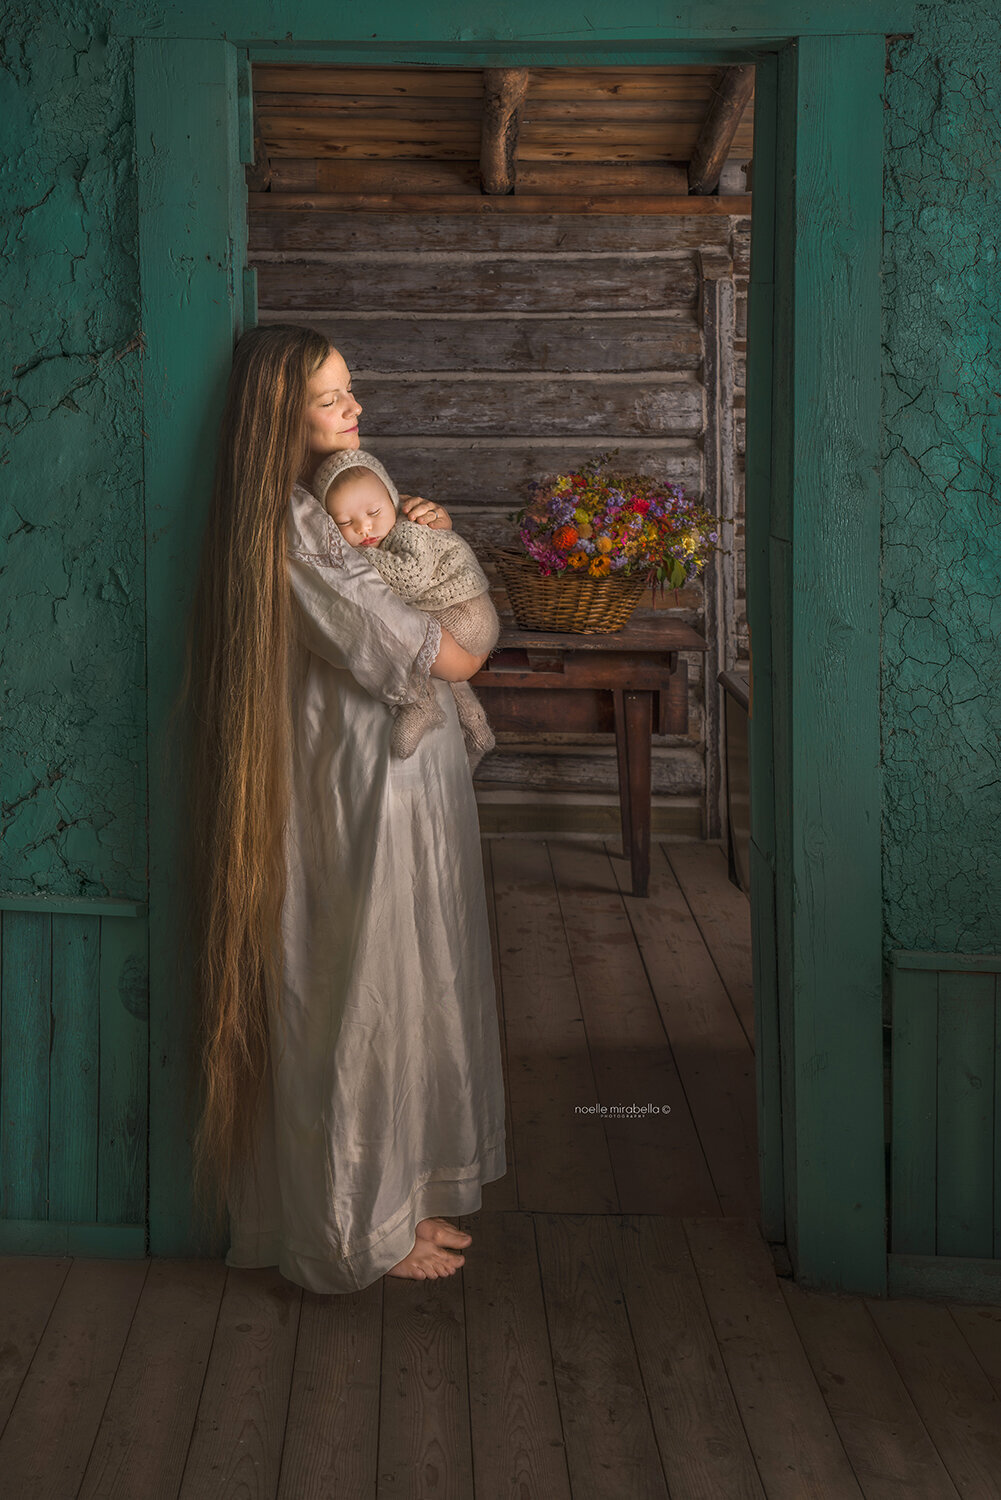 Woman/mother with floor length hair holding baby in doorway of 100-year-old house.